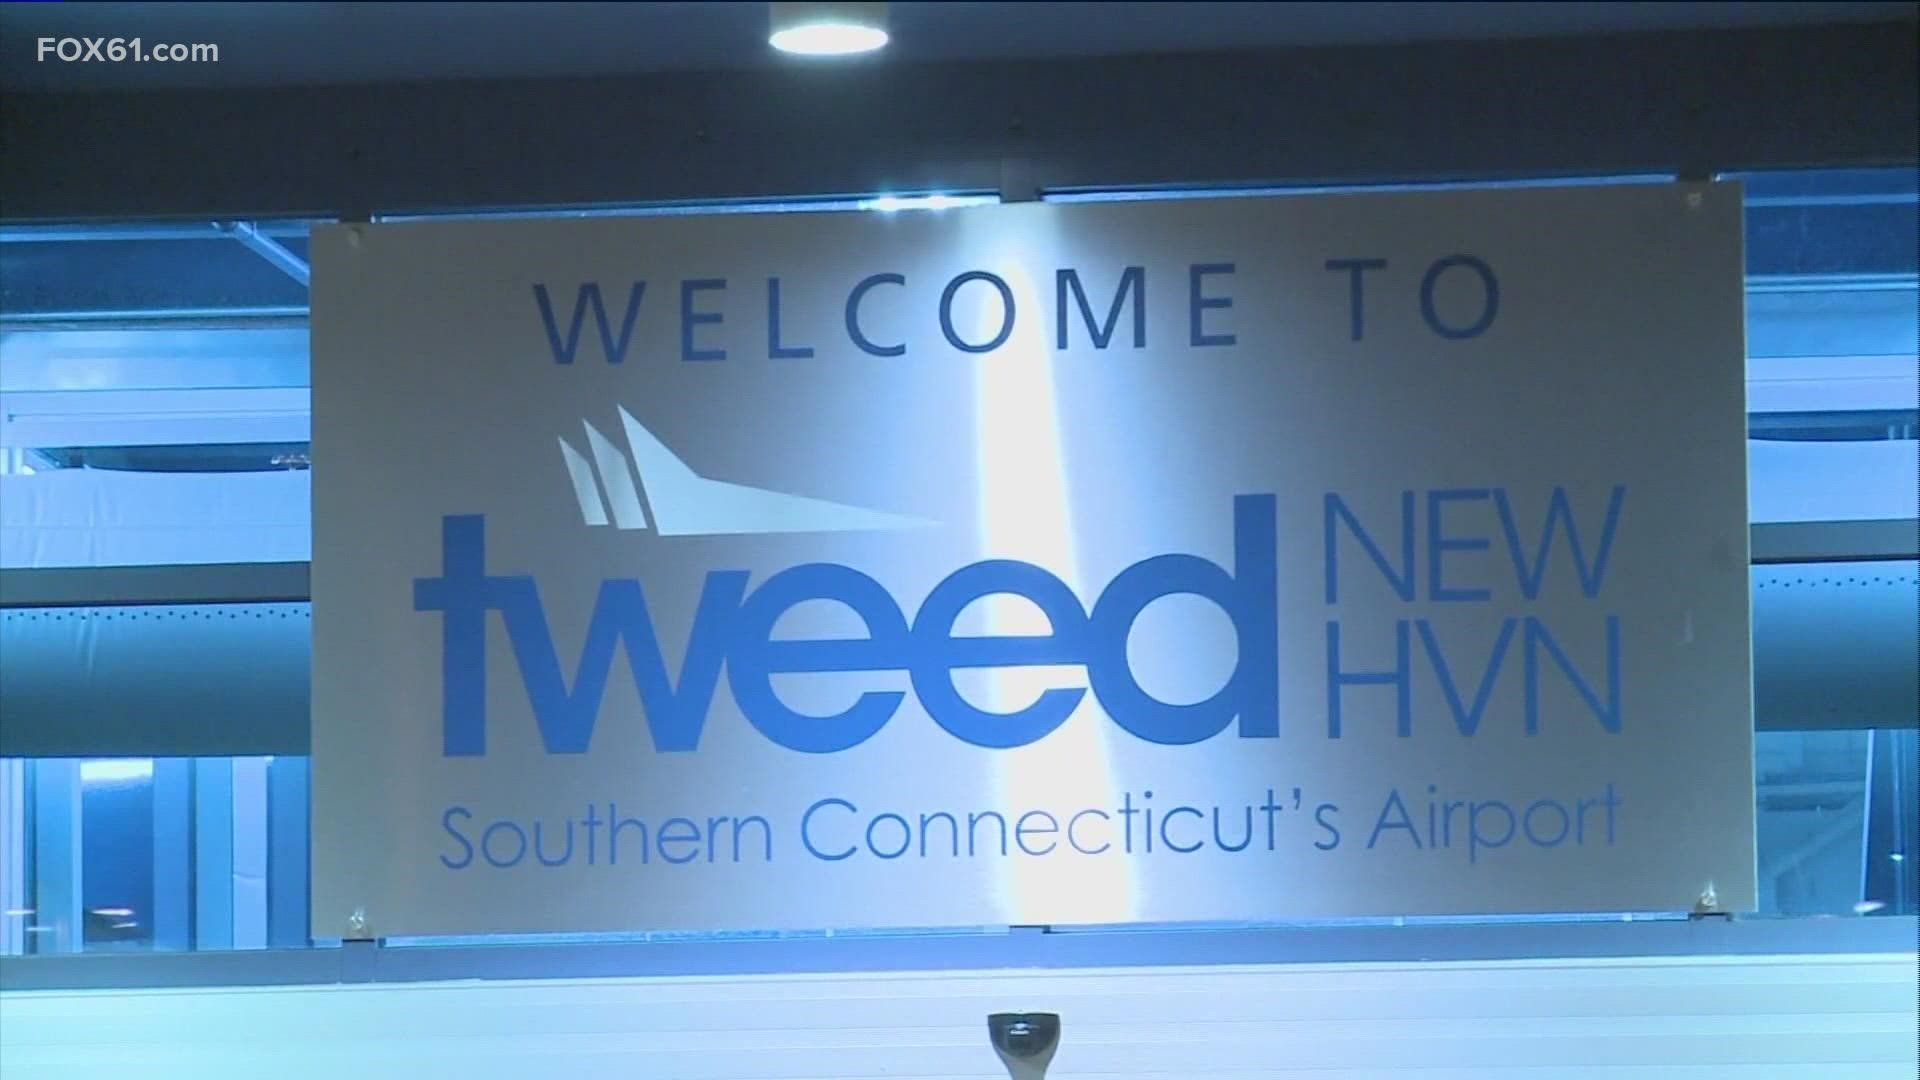 Avelo is the first airline to offer nonstop service from  New Haven to Florida.